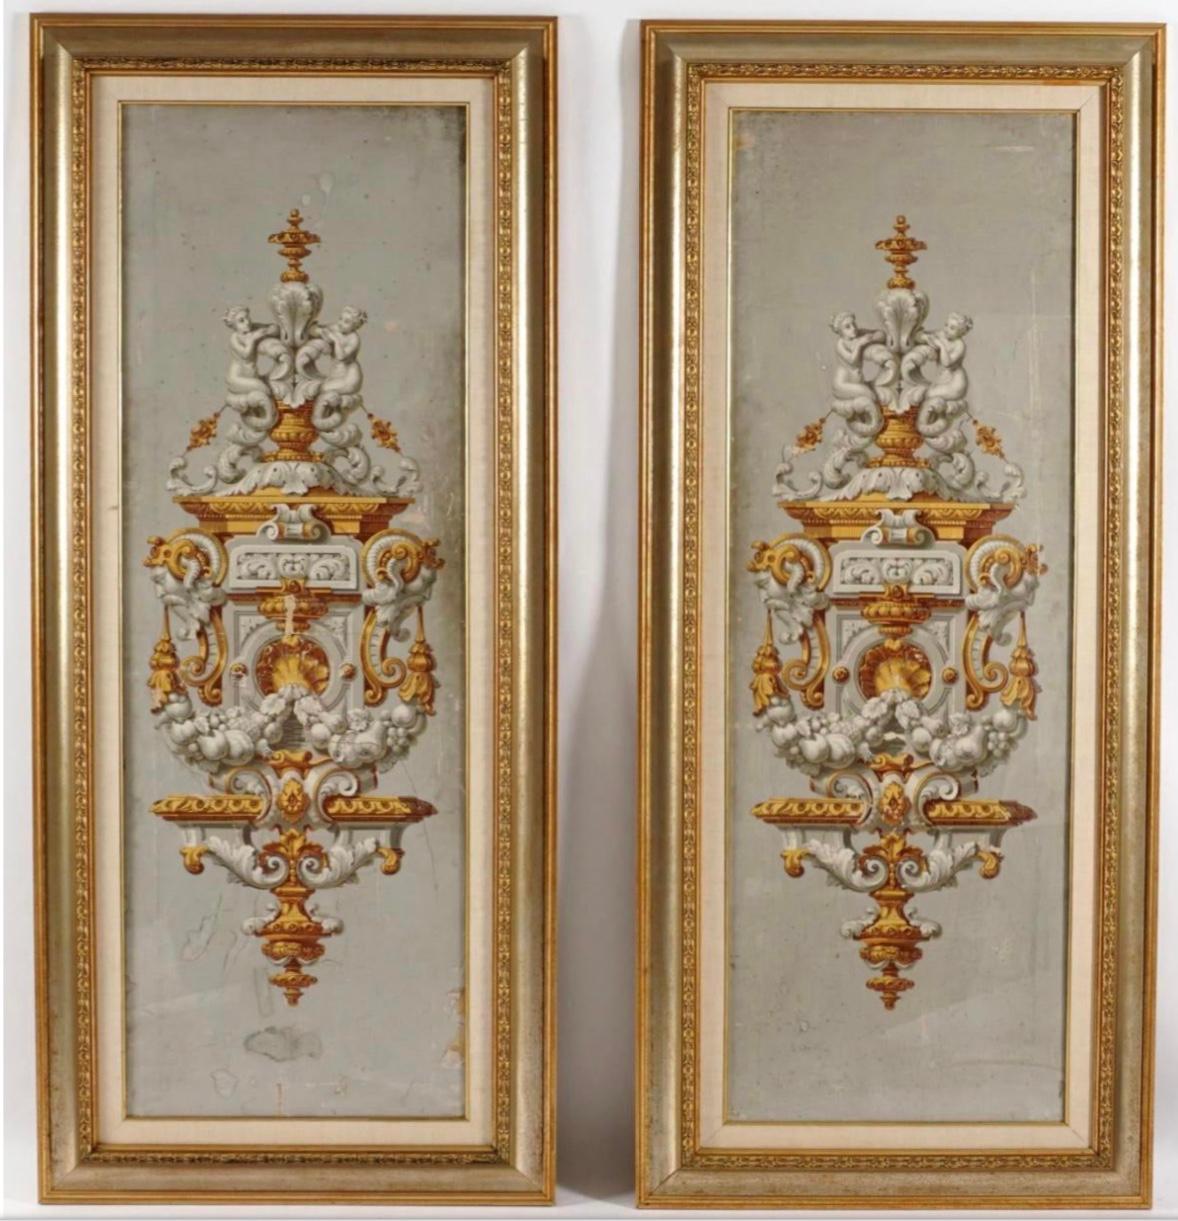 19th Century French Hand Painted Framed Wallpaper Panels, a Pair For Sale 3